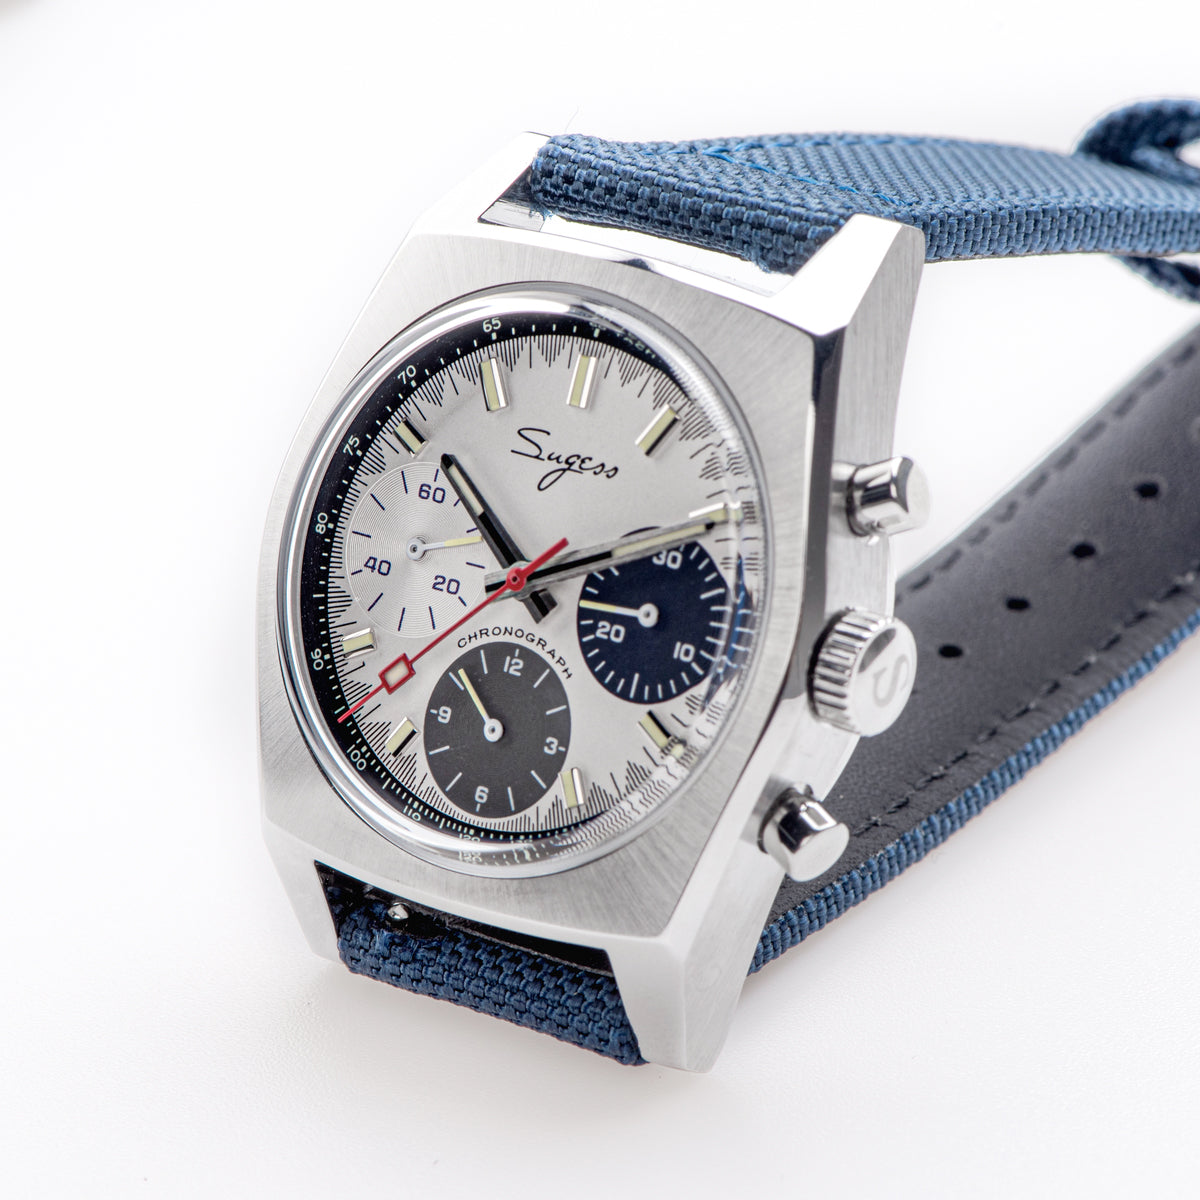 Chrono Heritage 419 Special Dial